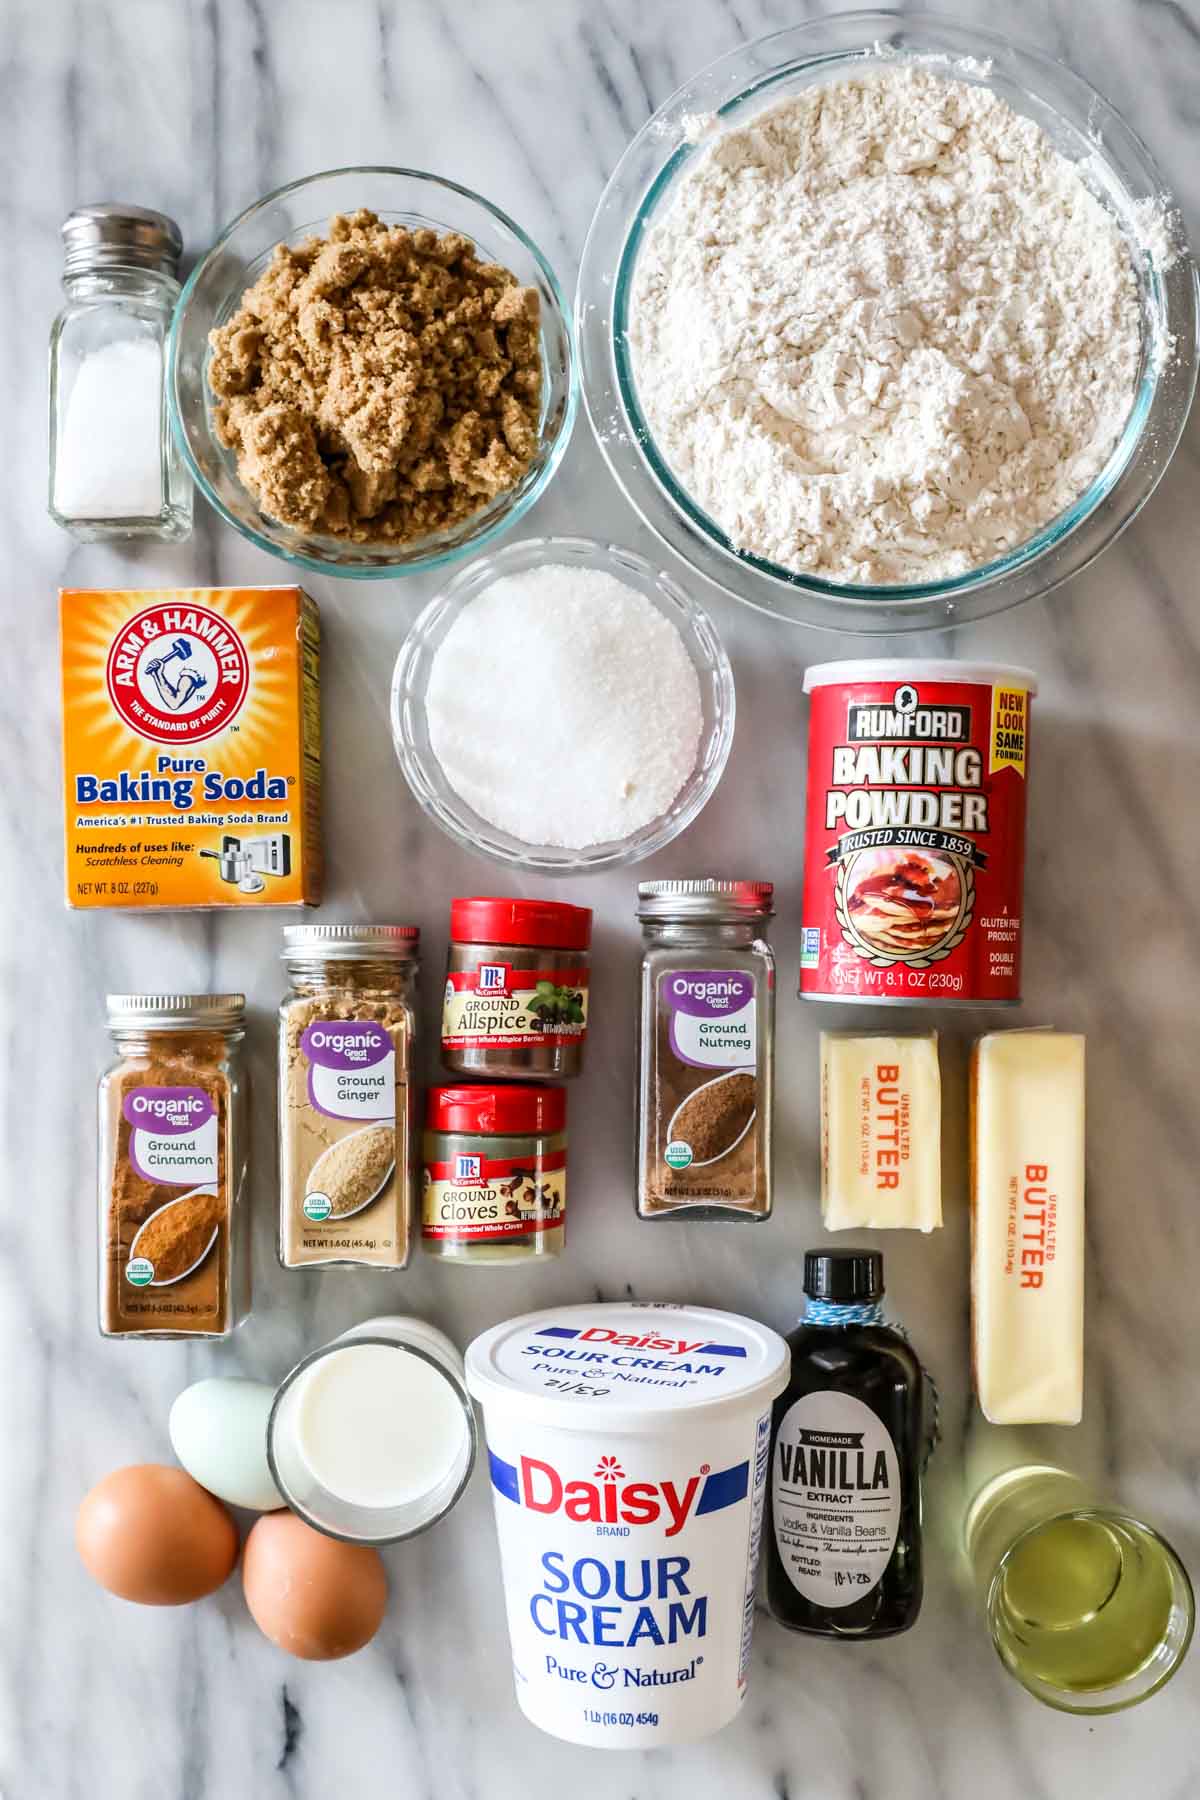 Overhead view of ingredients including spices, flour, sour cream, and more.